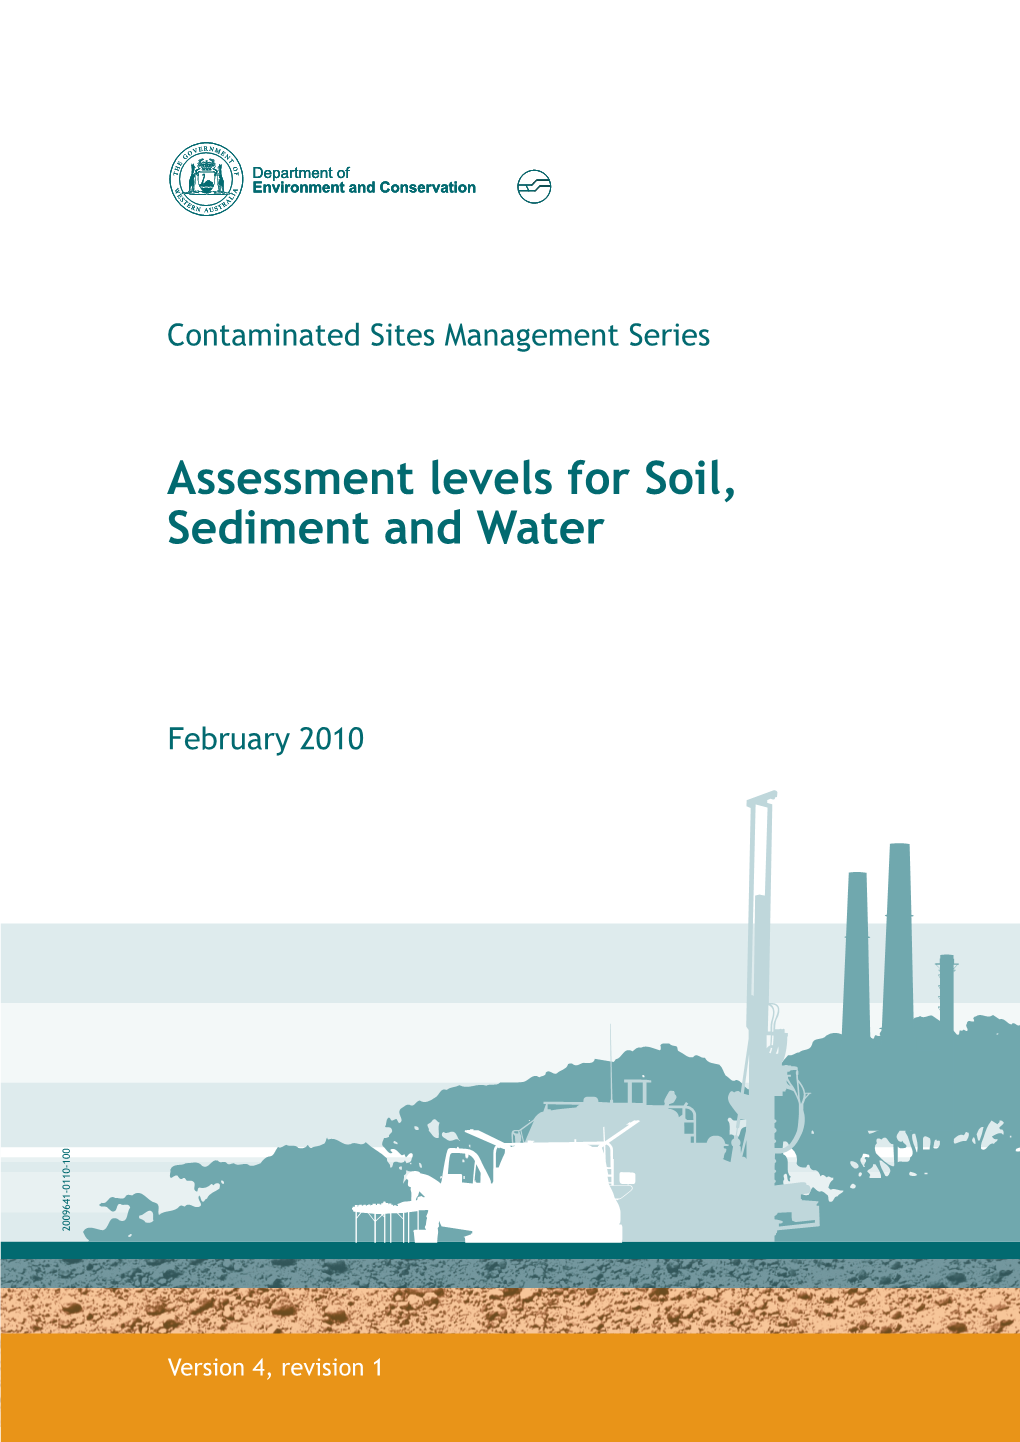 Assessment Levels for Soil, Sediment and Water